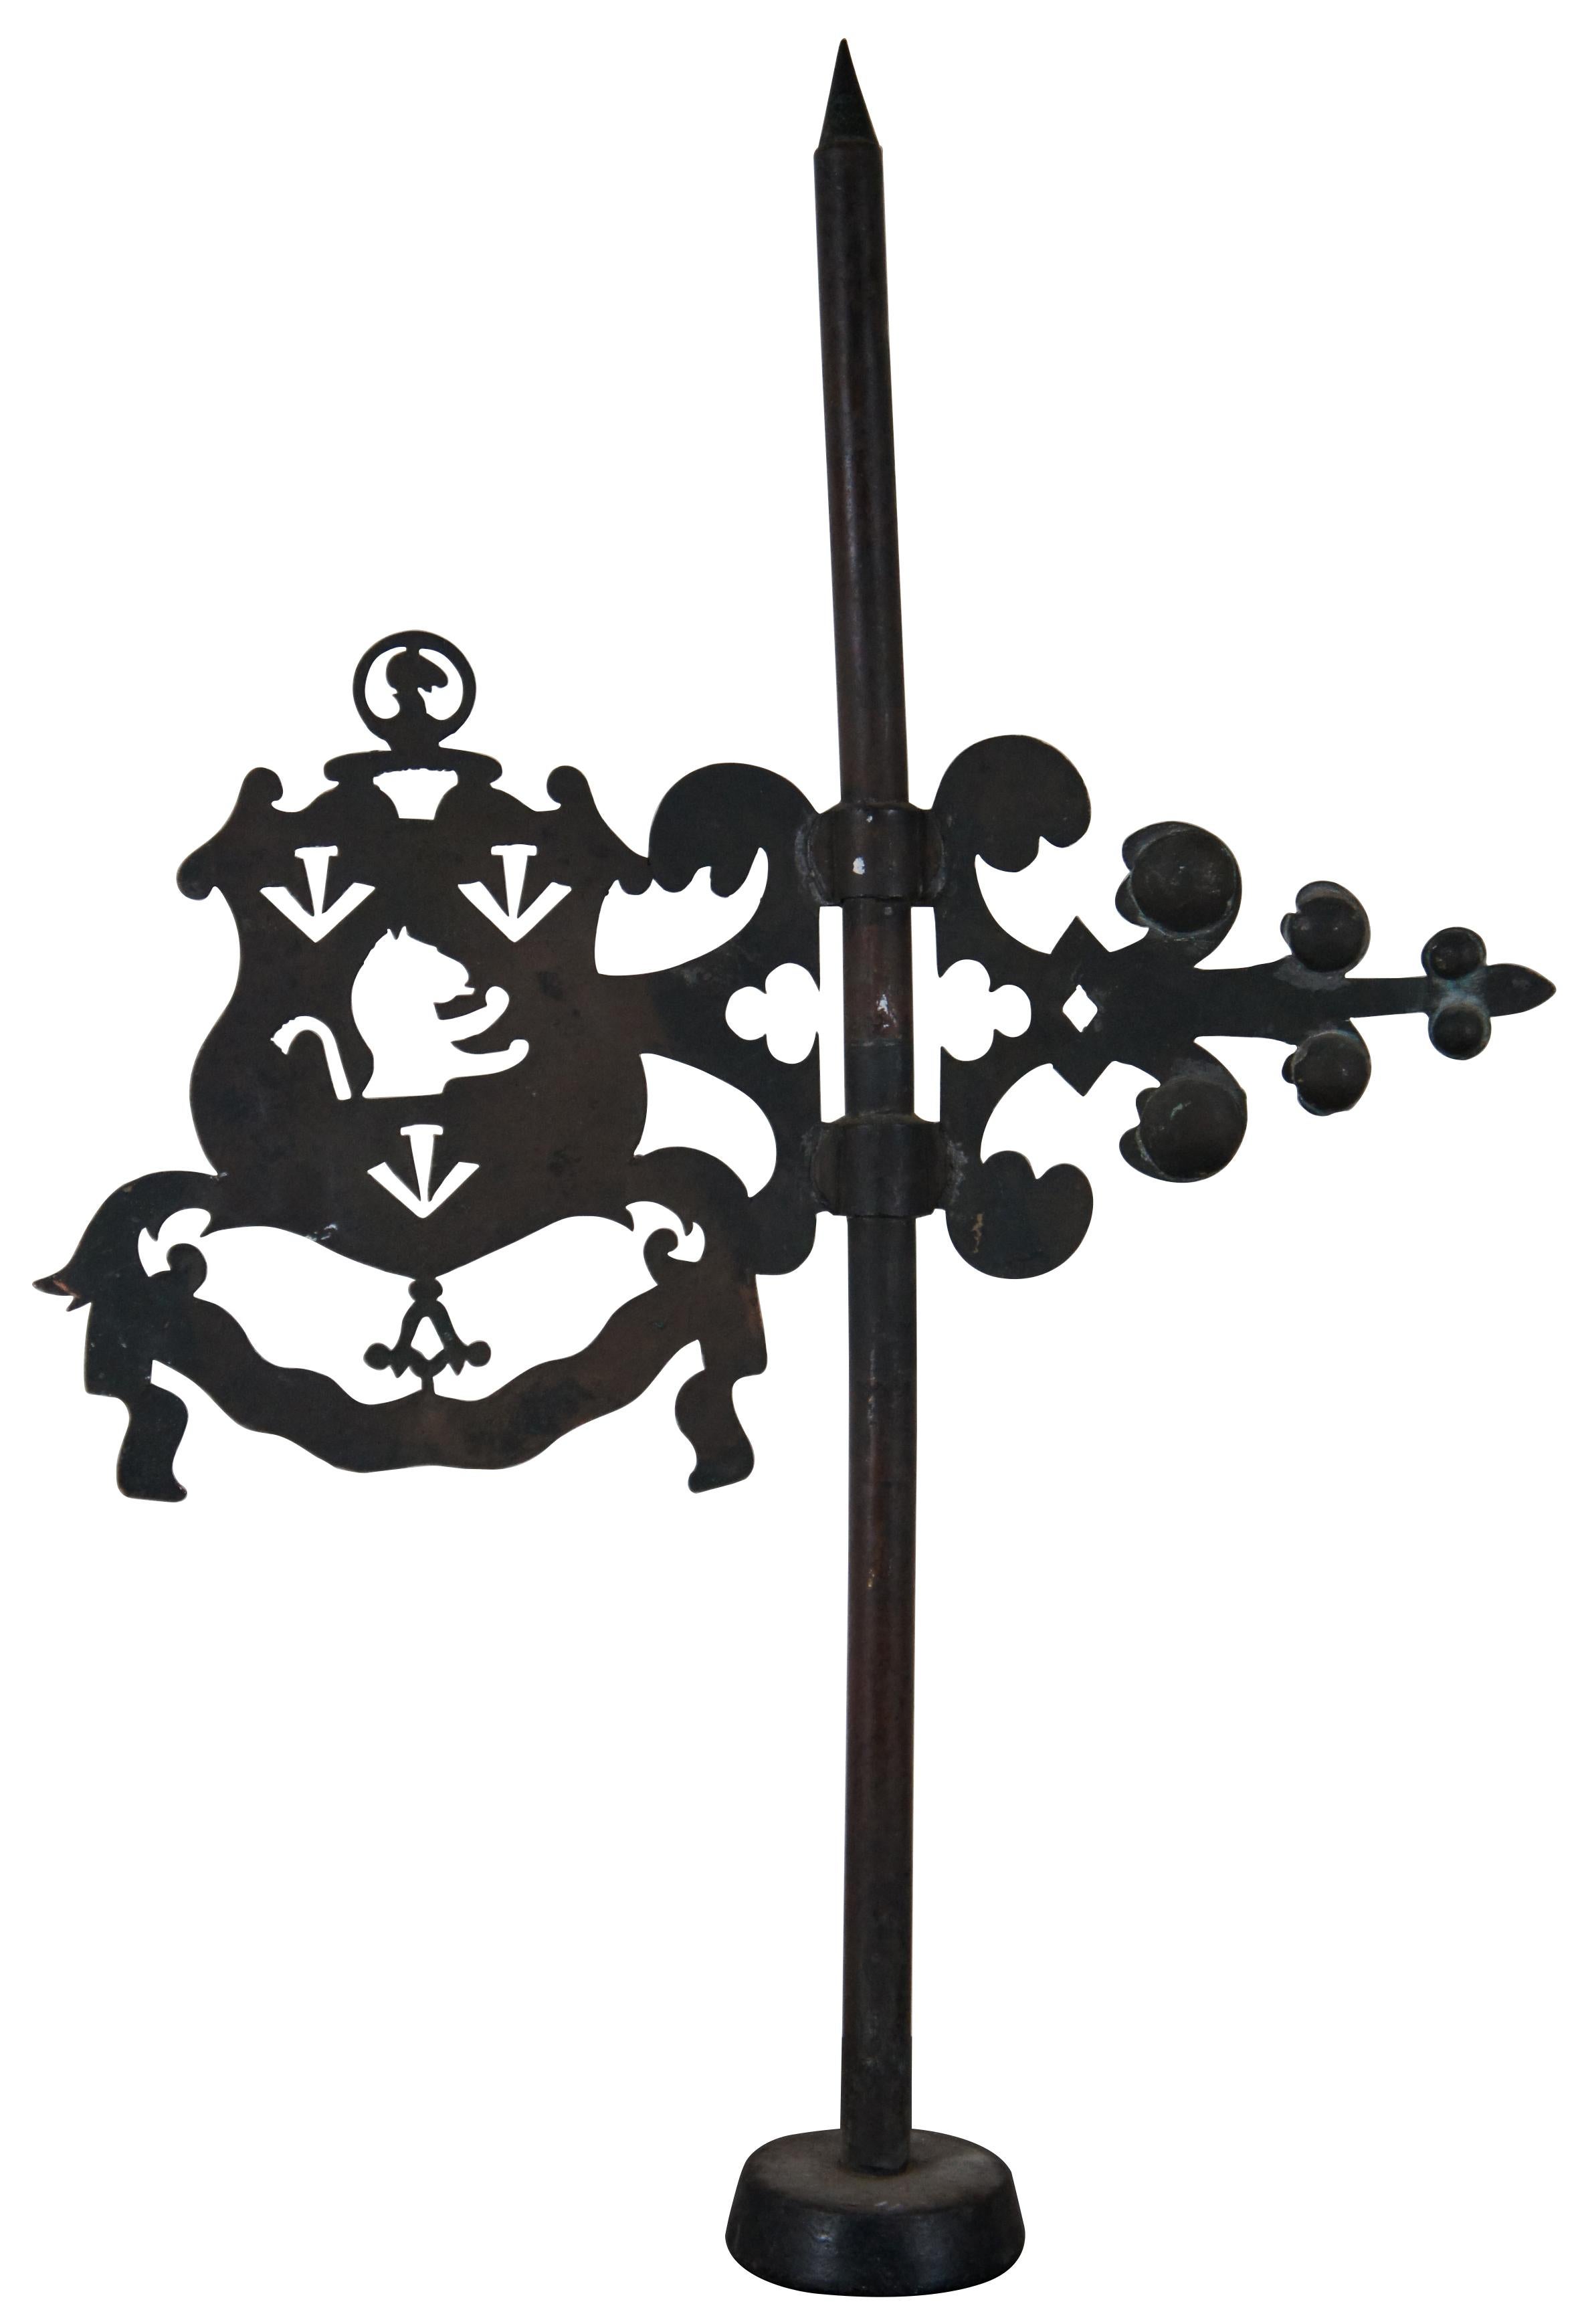 An exceptional and rare 15th Century English wrought iron banneret weathervane with lightning rod. Features an ornate arrow and pierced coat of arms or crest with lion. Marked “4 lb” on base.

The Rampant Lion with the crown above its head stood